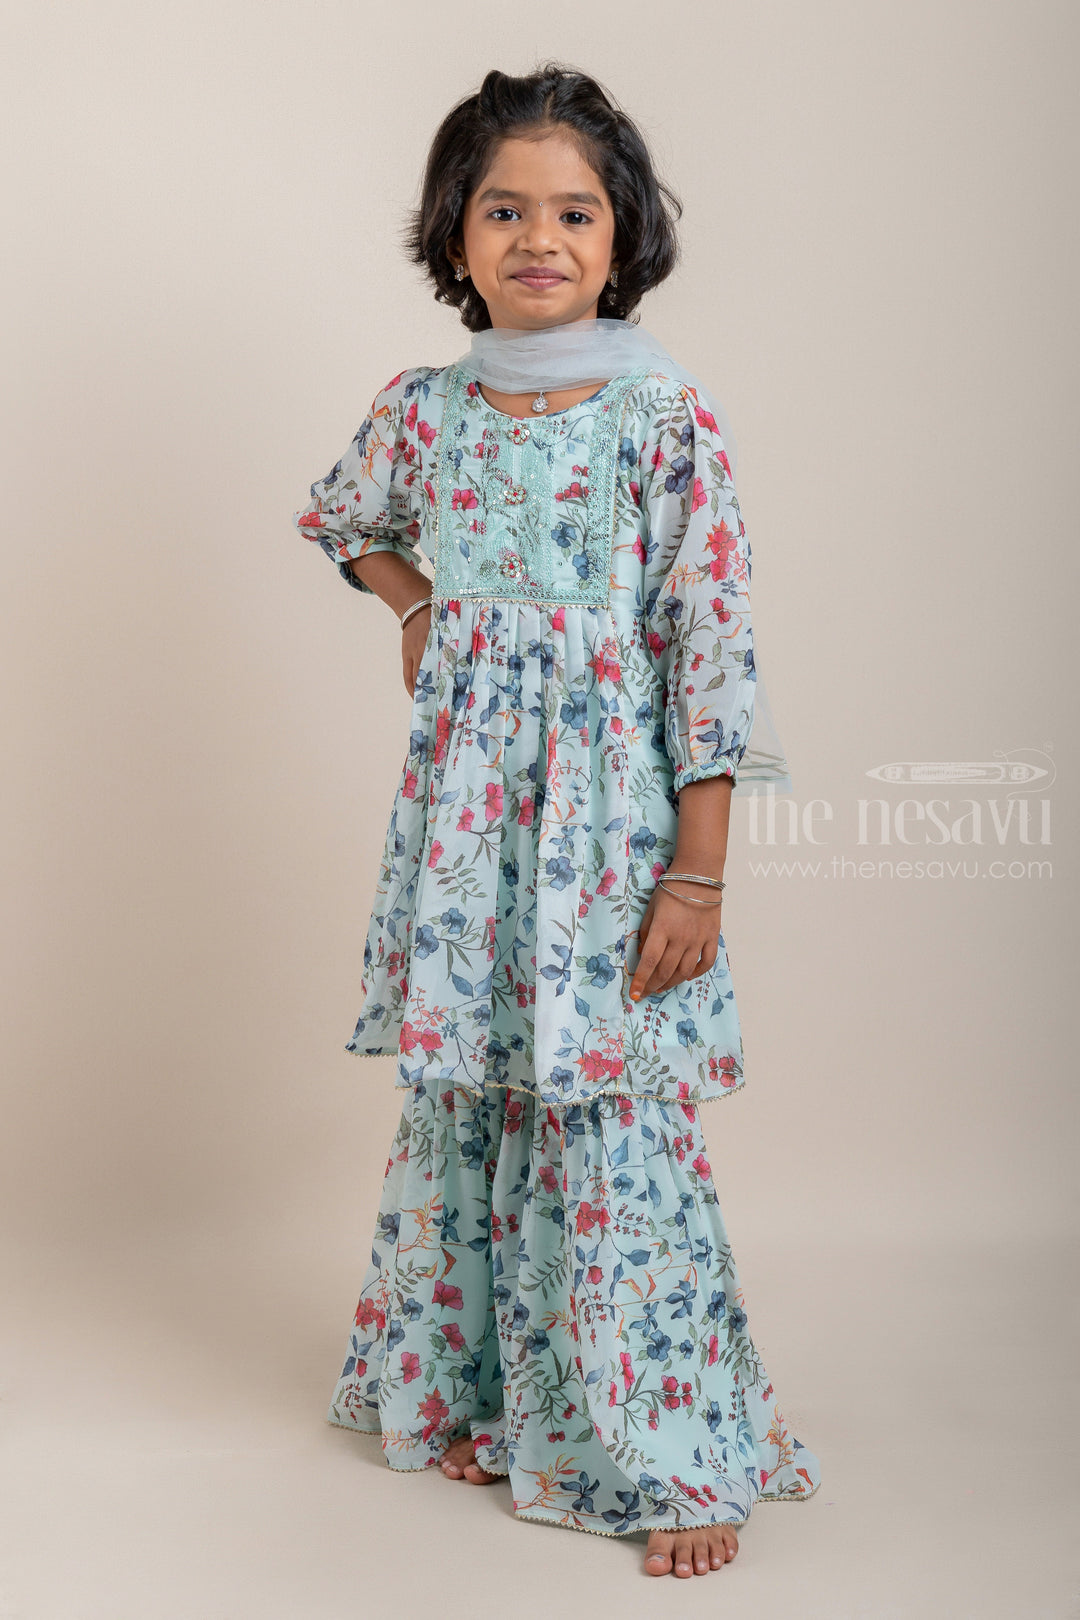 The Nesavu Sets & Suits Glitter Sequin Embroidered Floral Printed Turquoise Blue Kurti and Palazzo Suit for Girls with Organza Dupatta psr silks Nesavu 16 (1Y) / Turquoise GPS149A